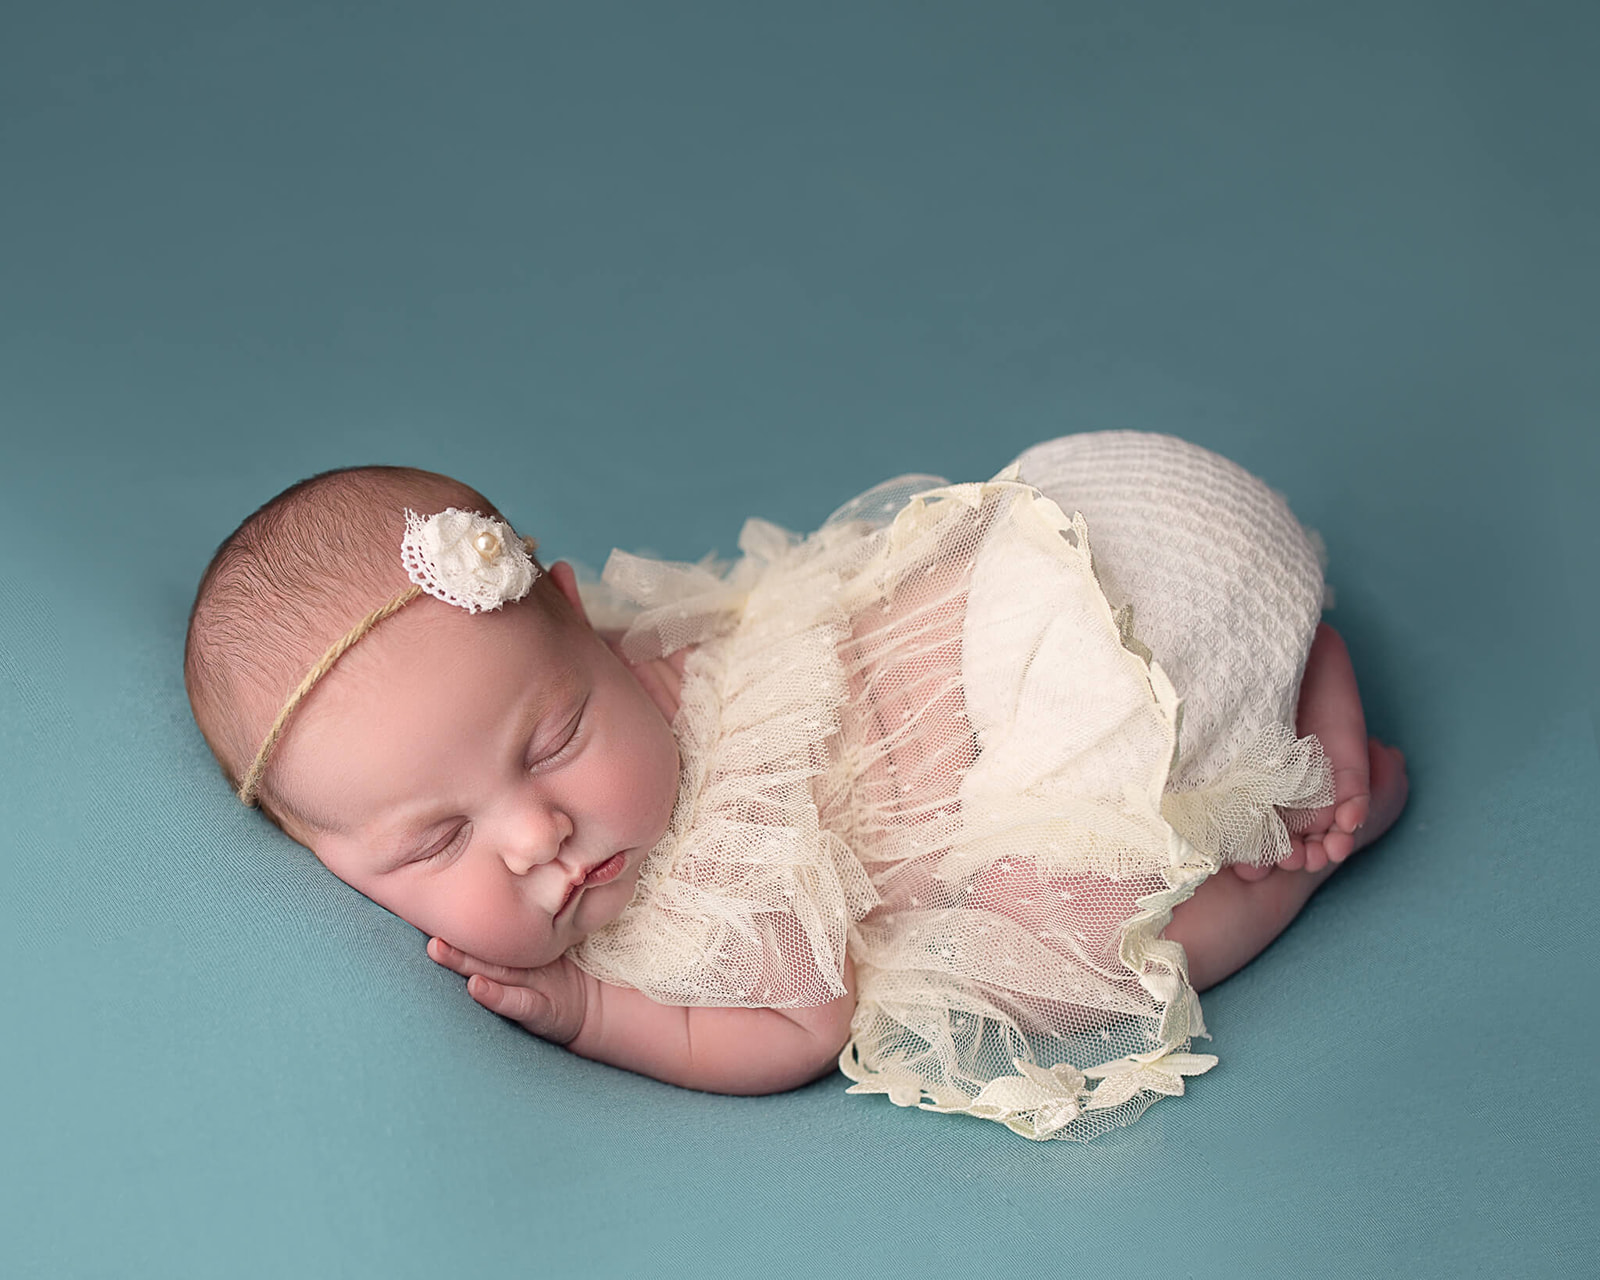 newborn dressed in cream colored mesh top and cloth bottom sleeping during newborn photography session. Newborn care tips